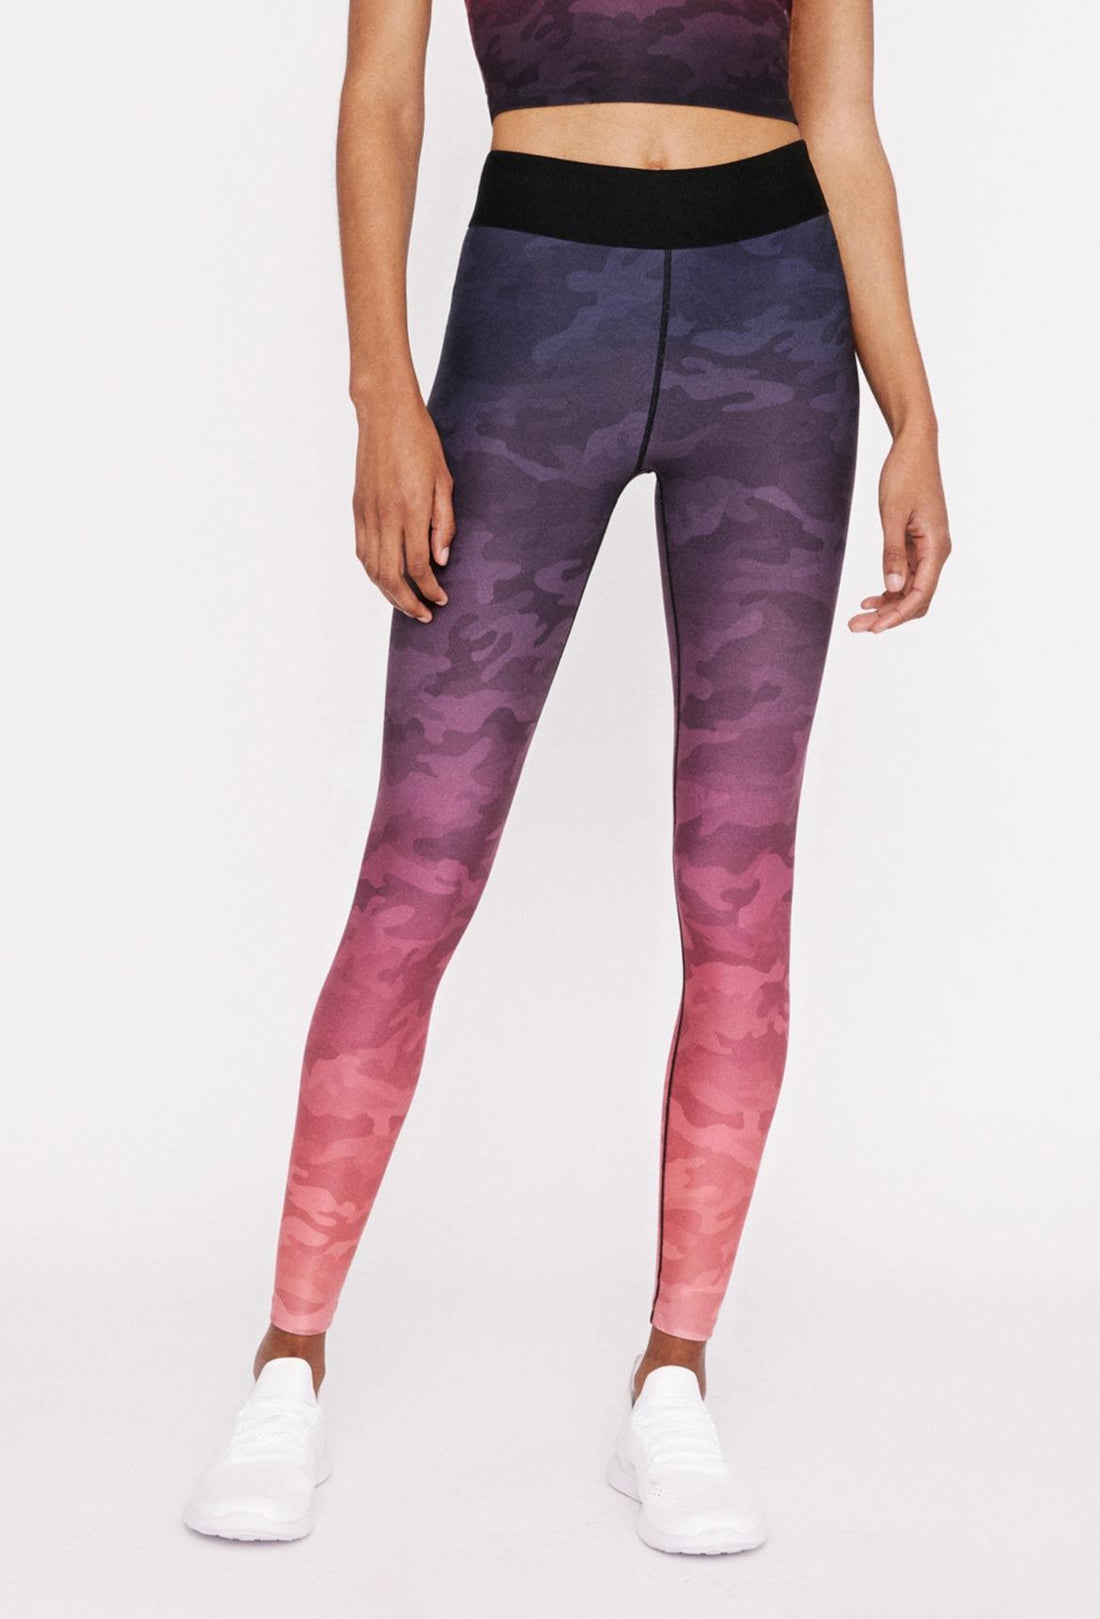 iggy-legging-infrared-camoW.I.T.H.-Wear It To Heart